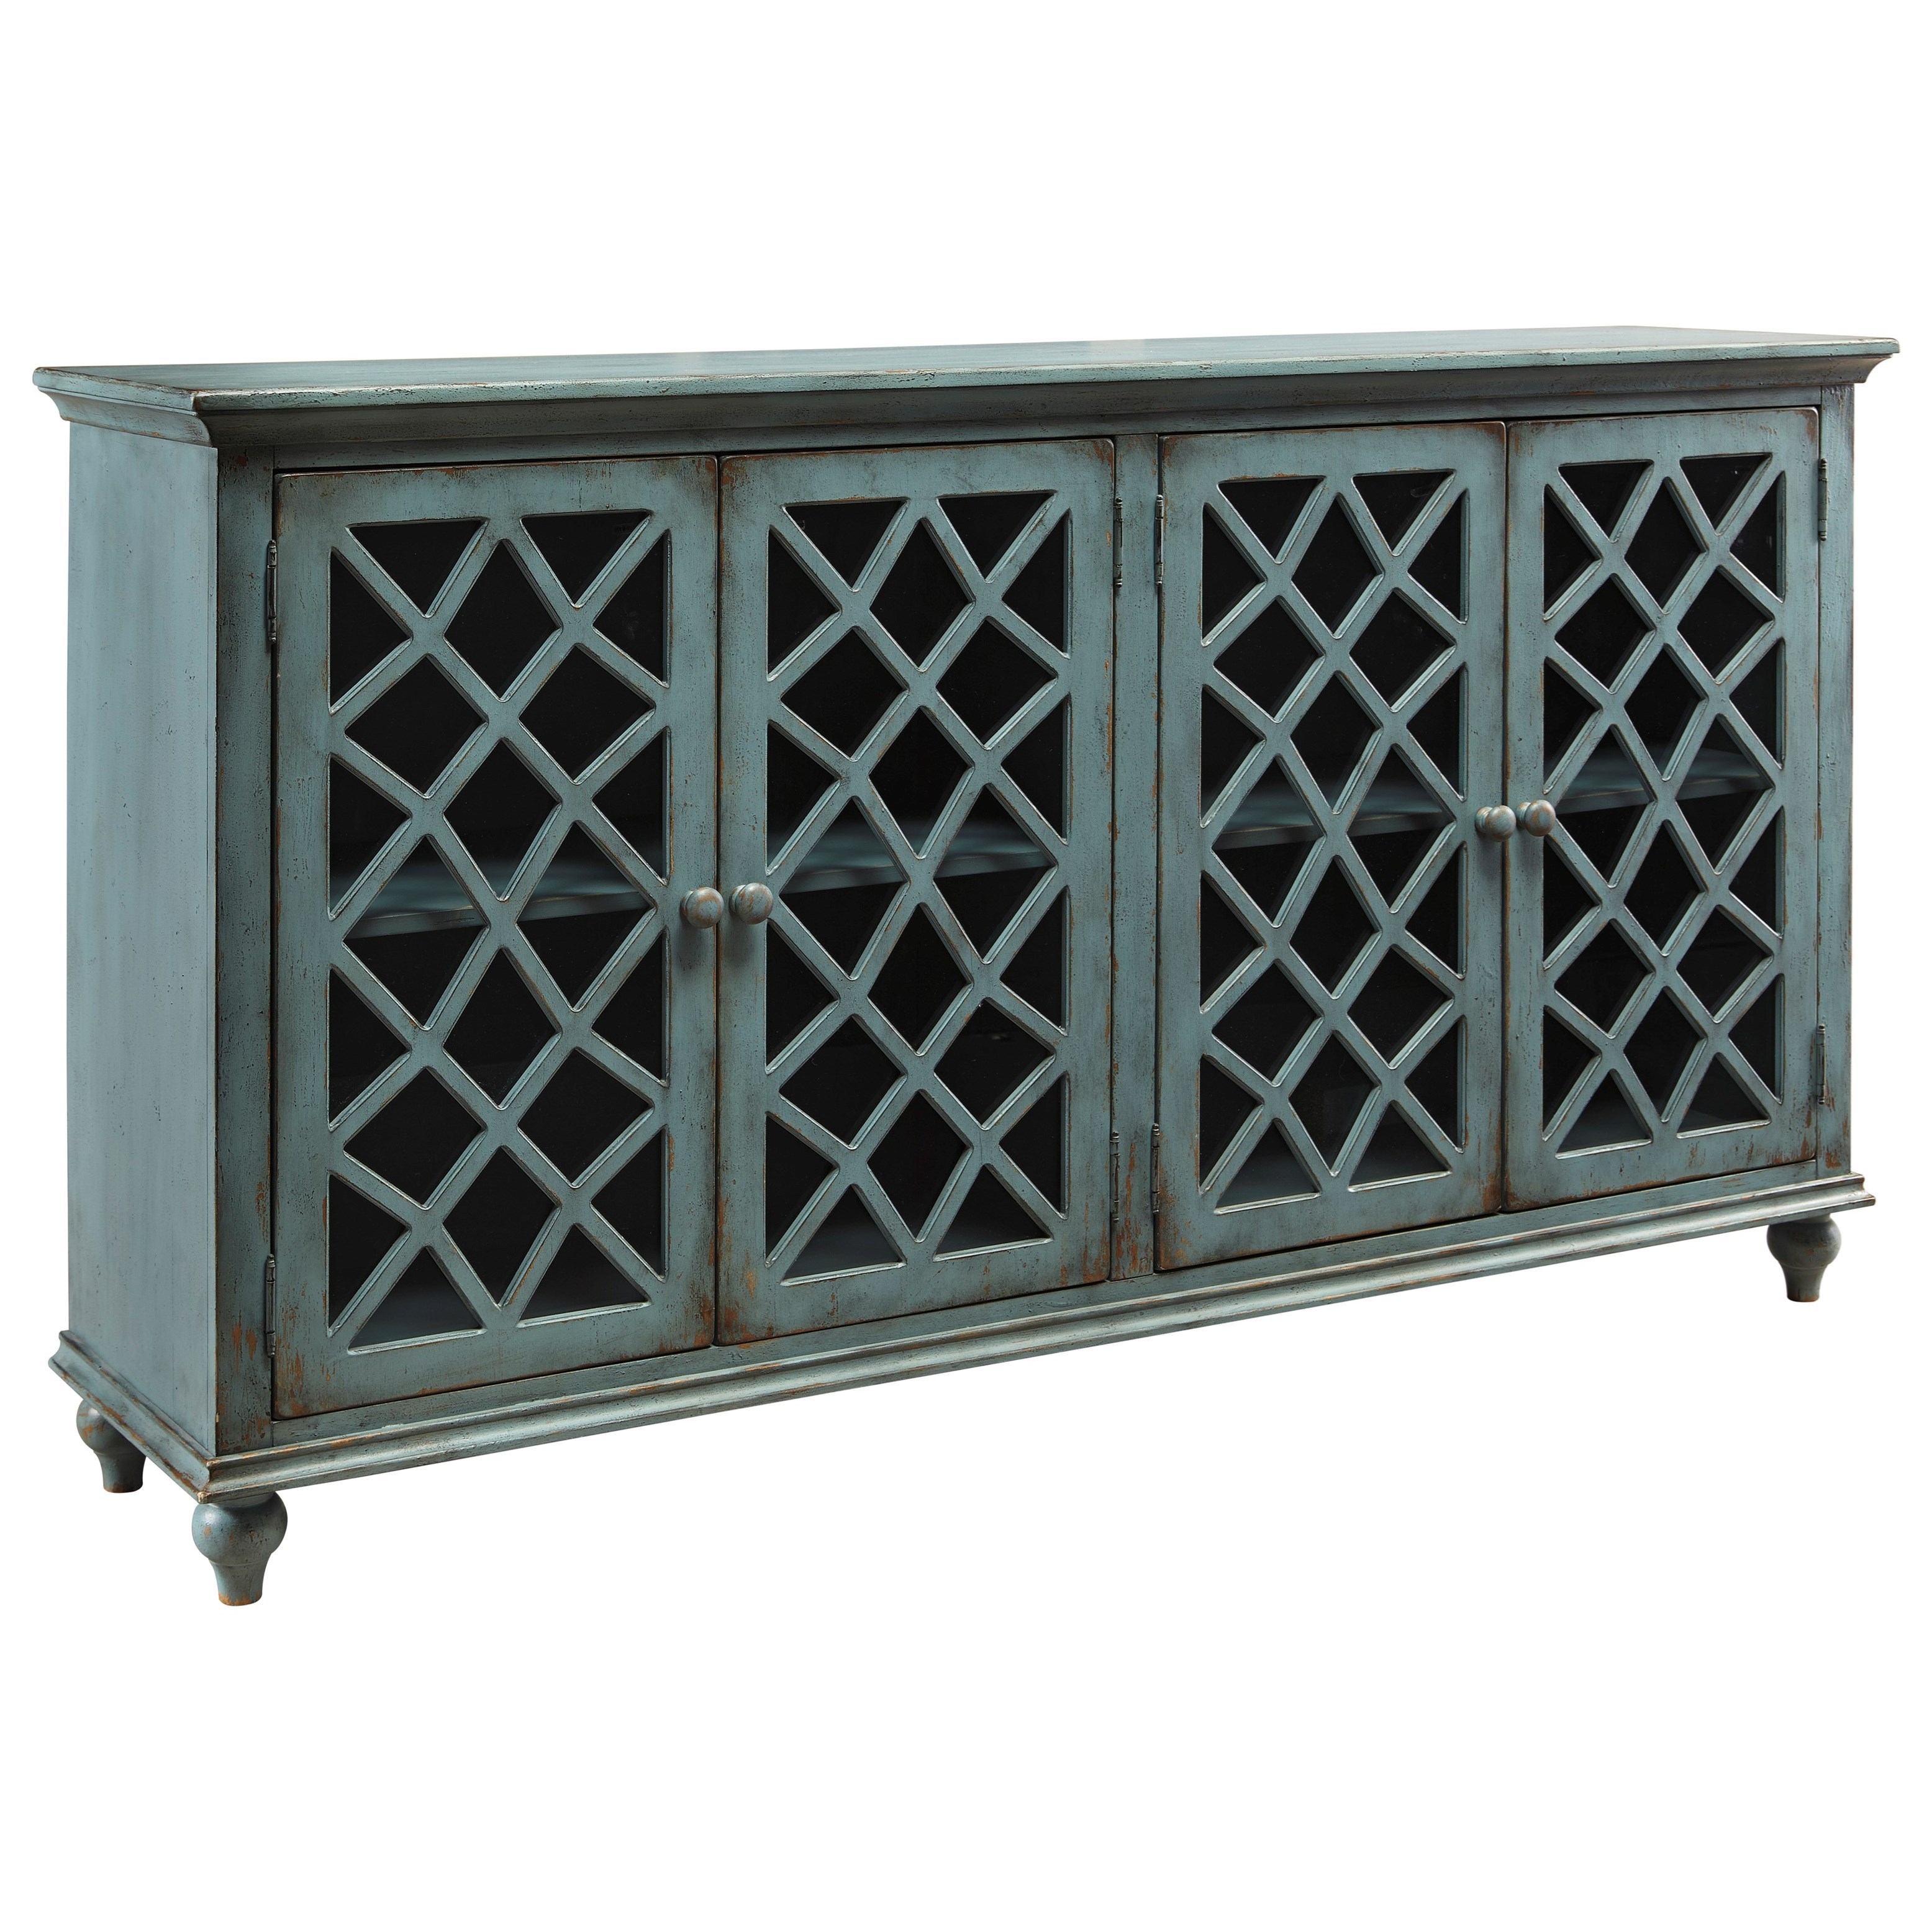 signature design ashley mirimyn lattice glass door accent cabinet products color cottage accents table with wine rack item number decorative clocks round nightstand bedroom desk